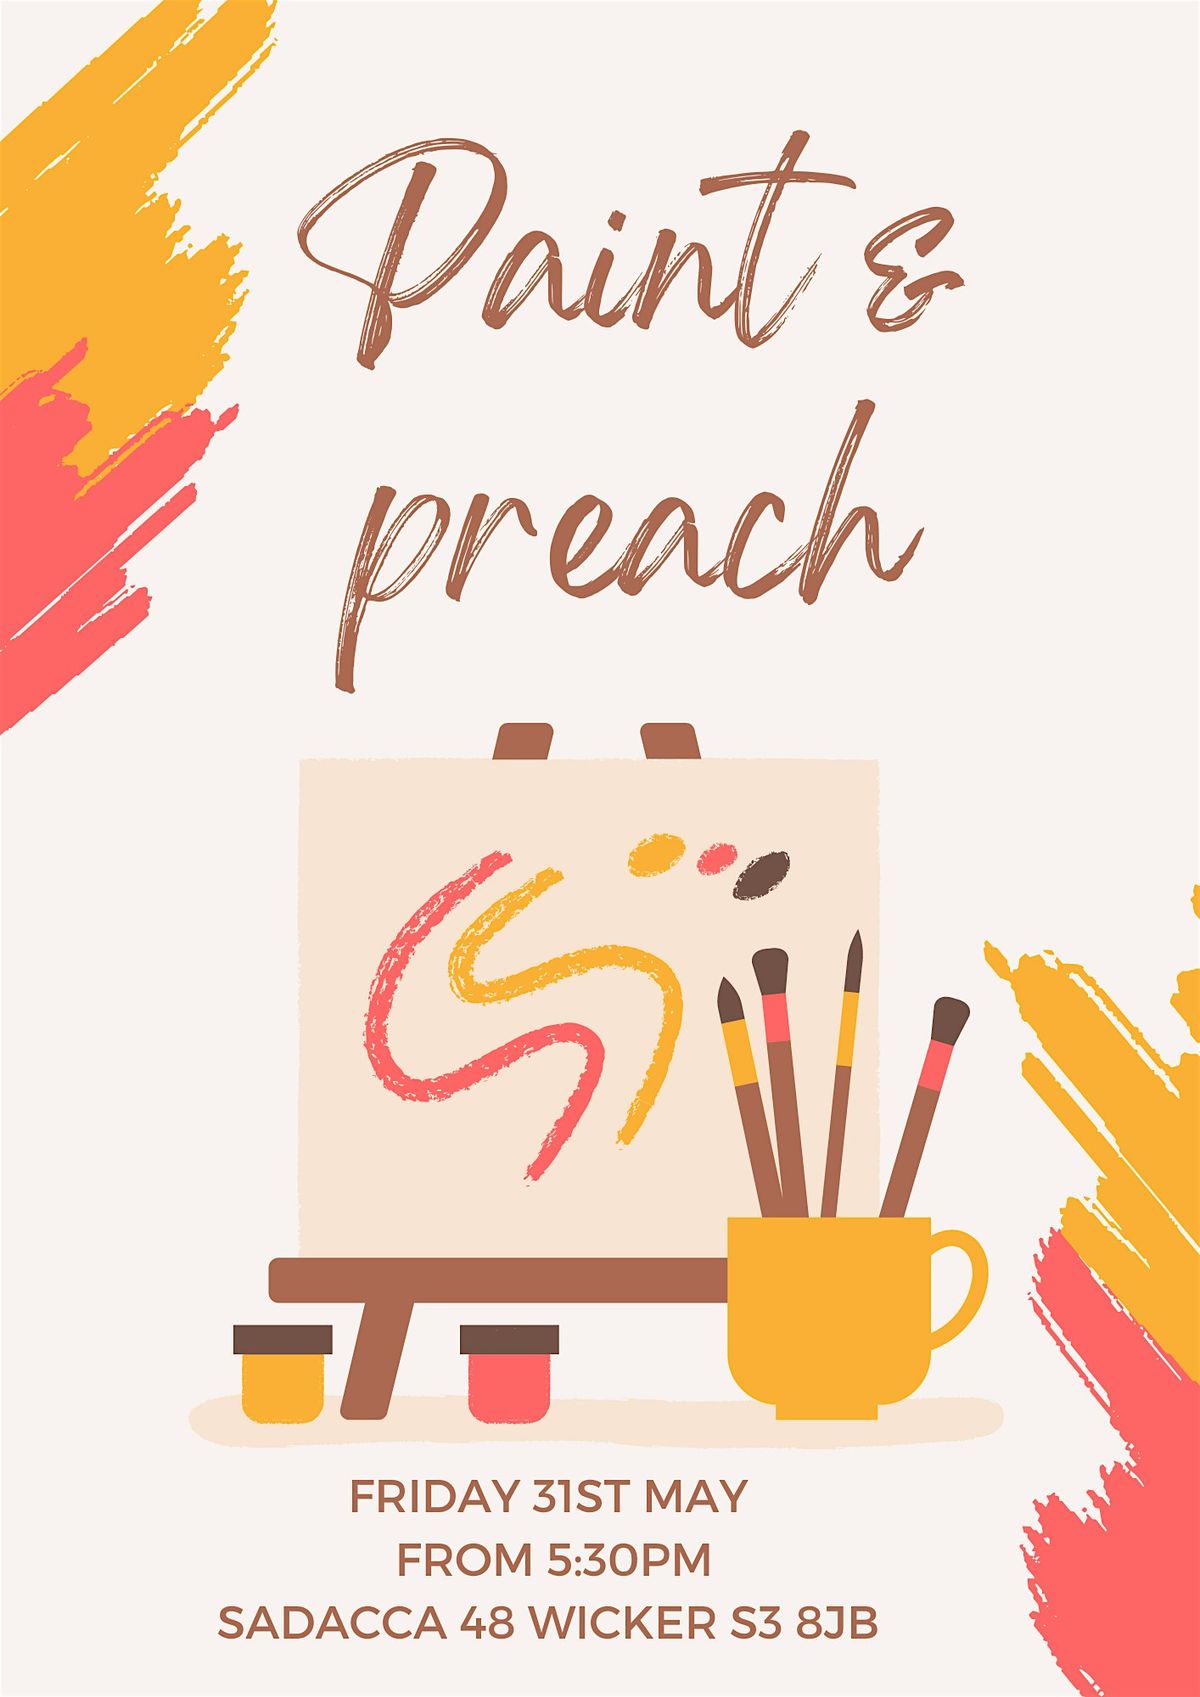 Paint and Preach - Youths creative night